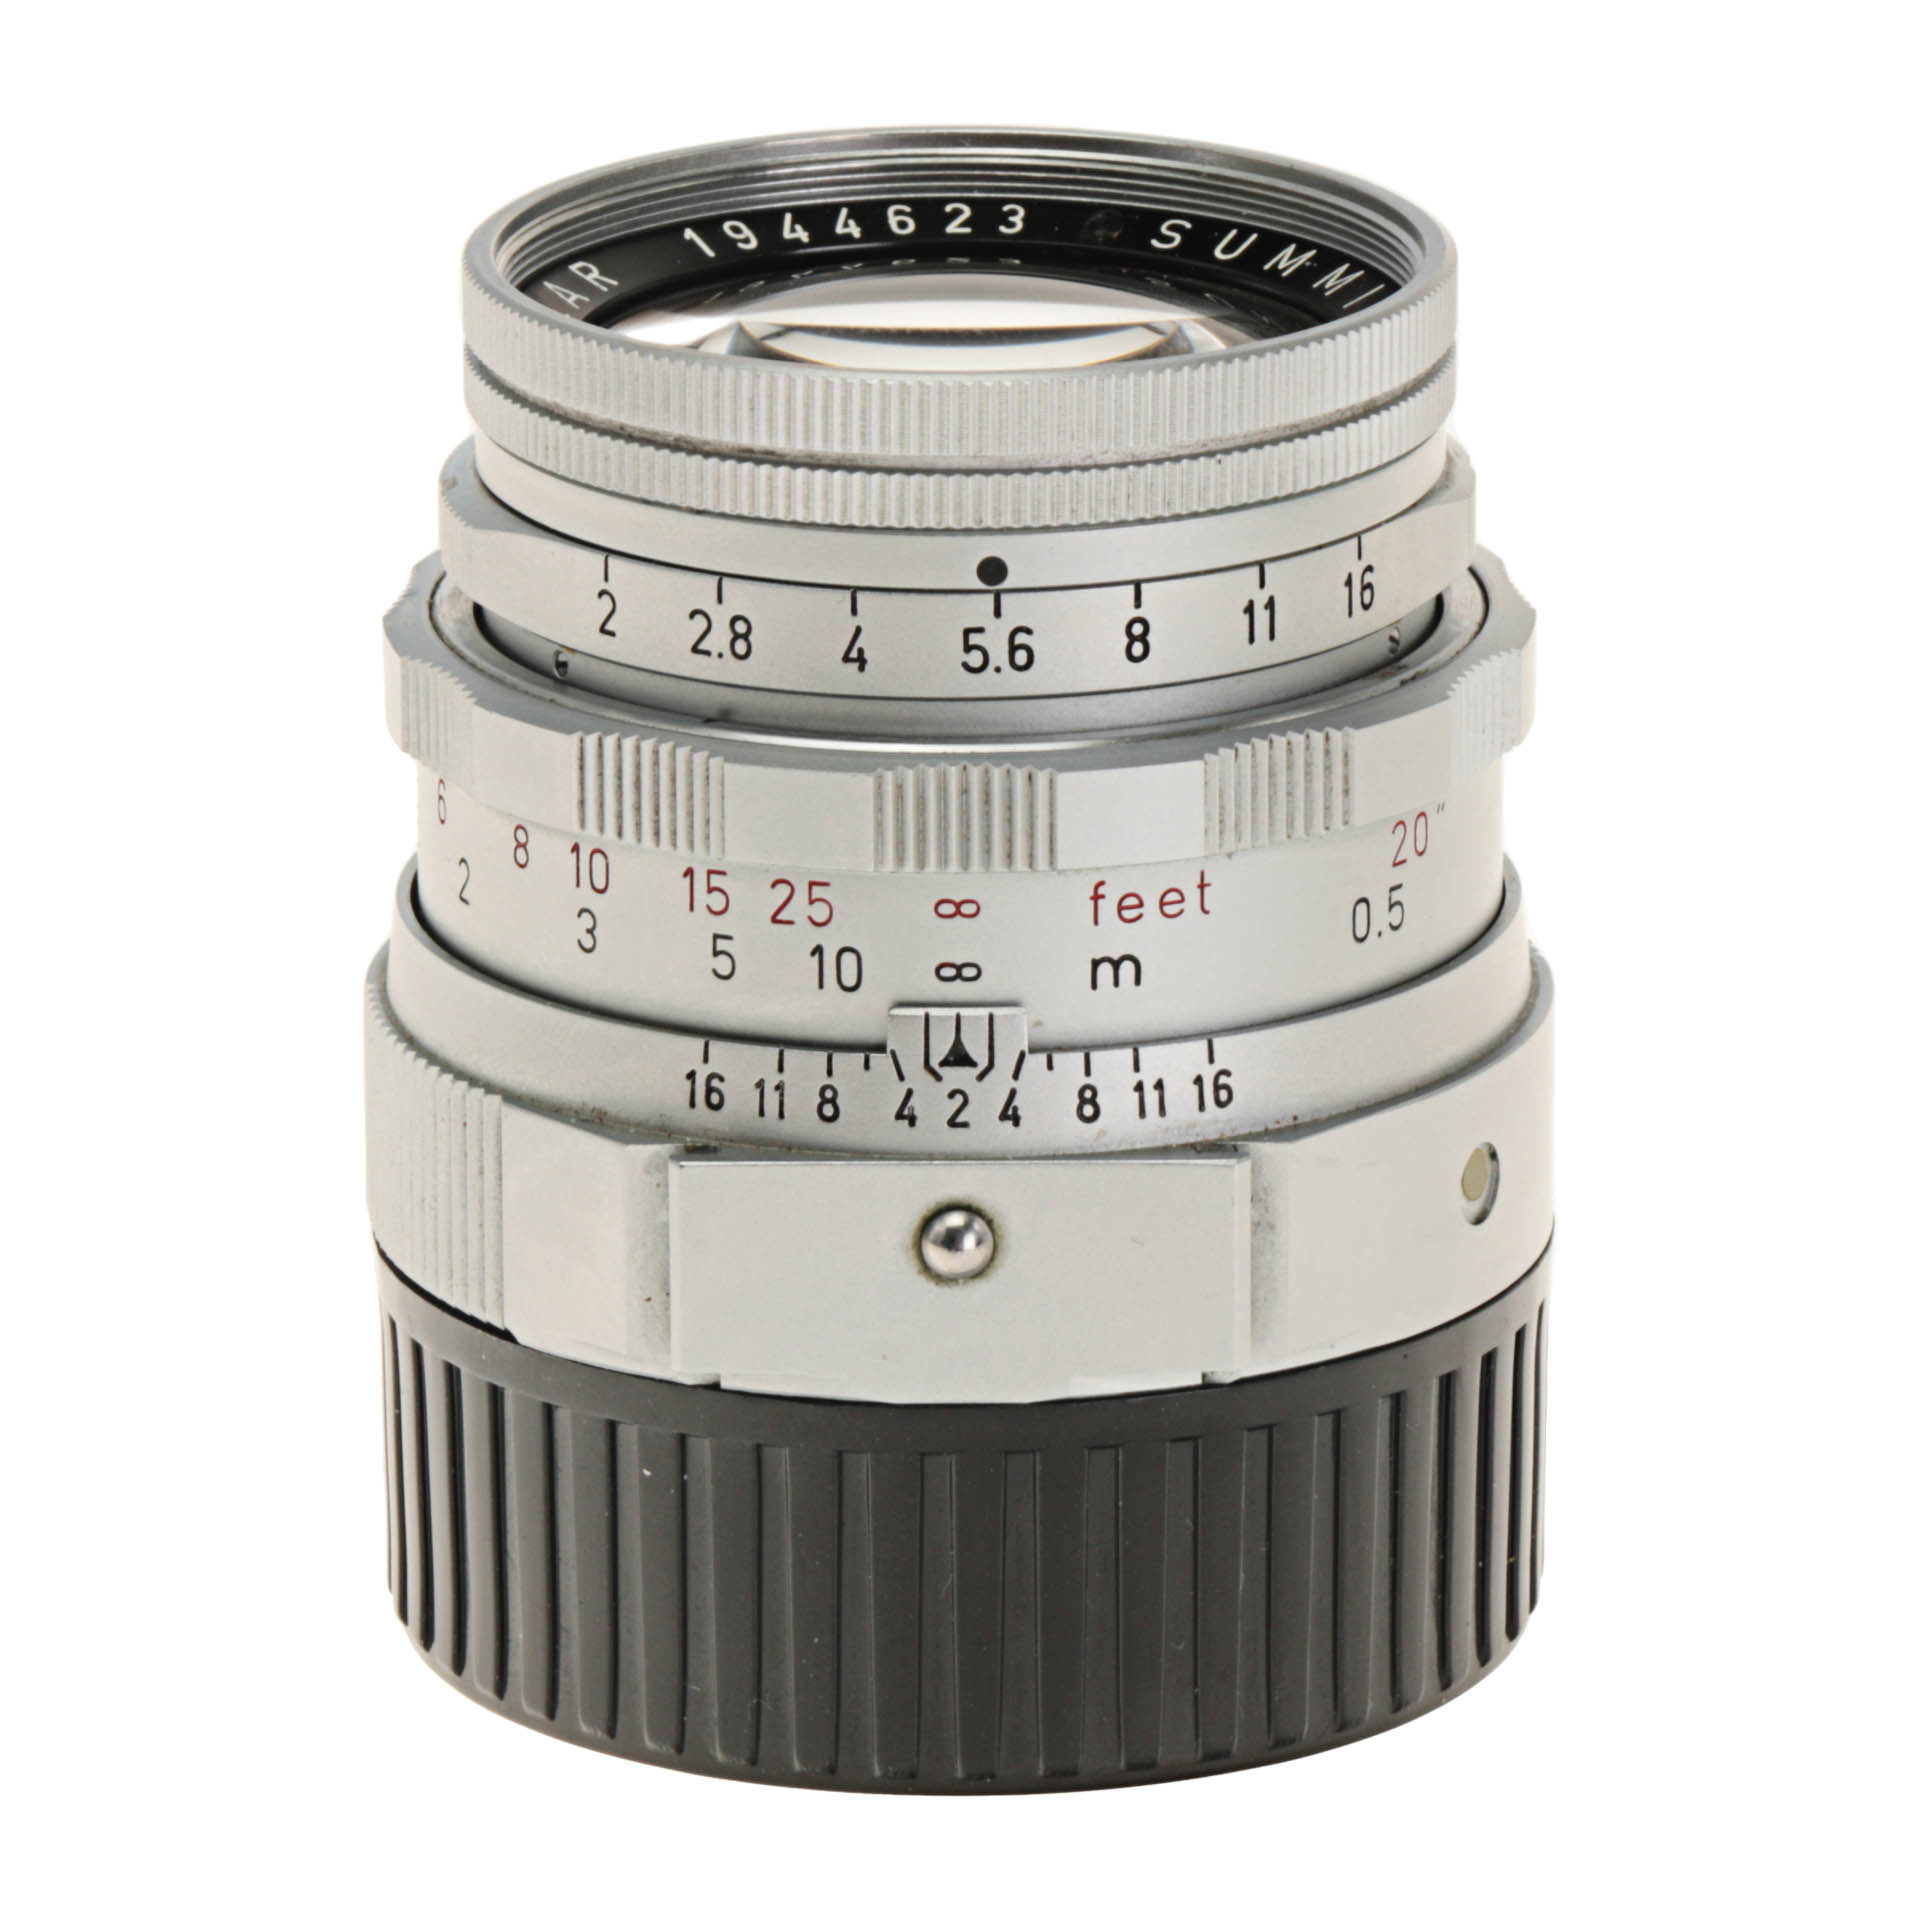 Leica Leitz M 50mm F2 Summicron Manual Focus Rangefinder Lens Chrome with UV Filter and Spectacles